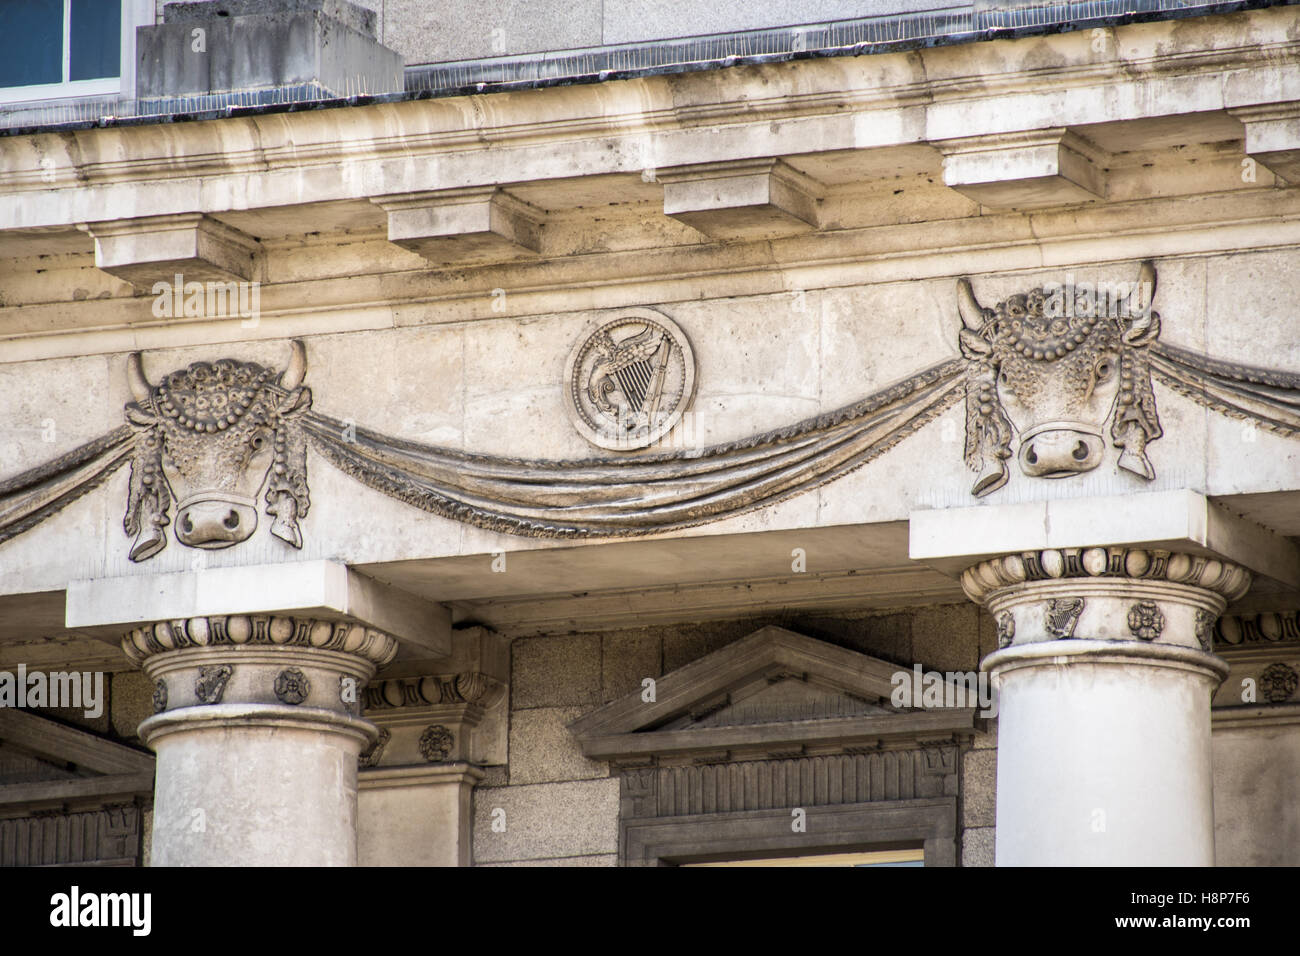 Dublin, Ireland- Detail of decorative reliefs on the exterior of the Custom House, a neoclassical 18th-century building. Stock Photo